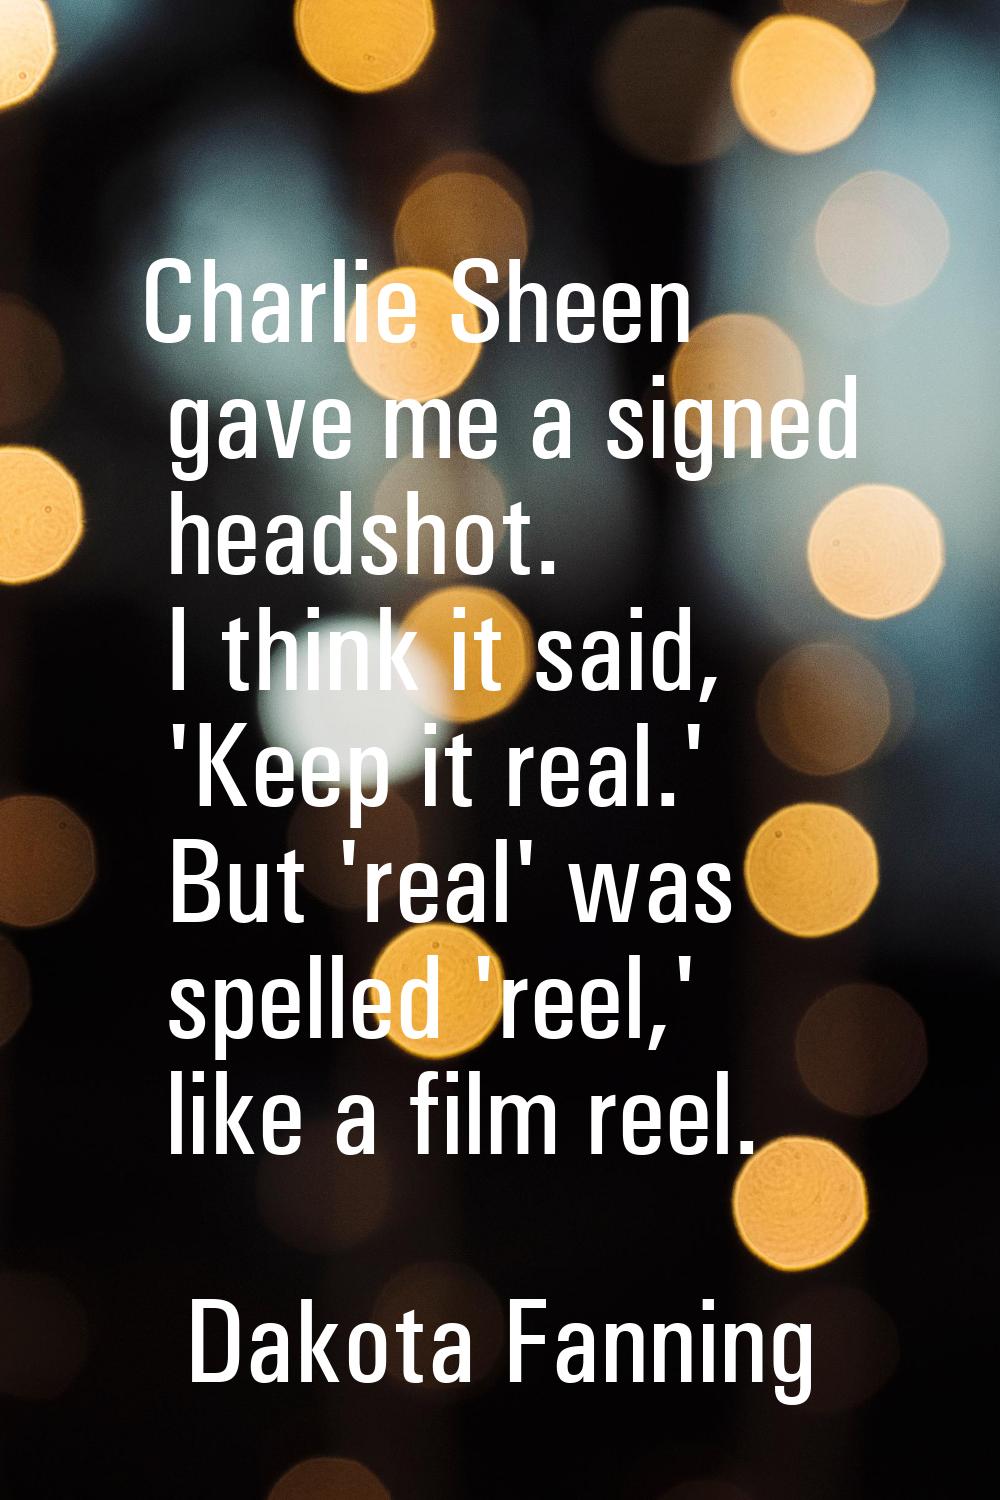 Charlie Sheen gave me a signed headshot. I think it said, 'Keep it real.' But 'real' was spelled 'r